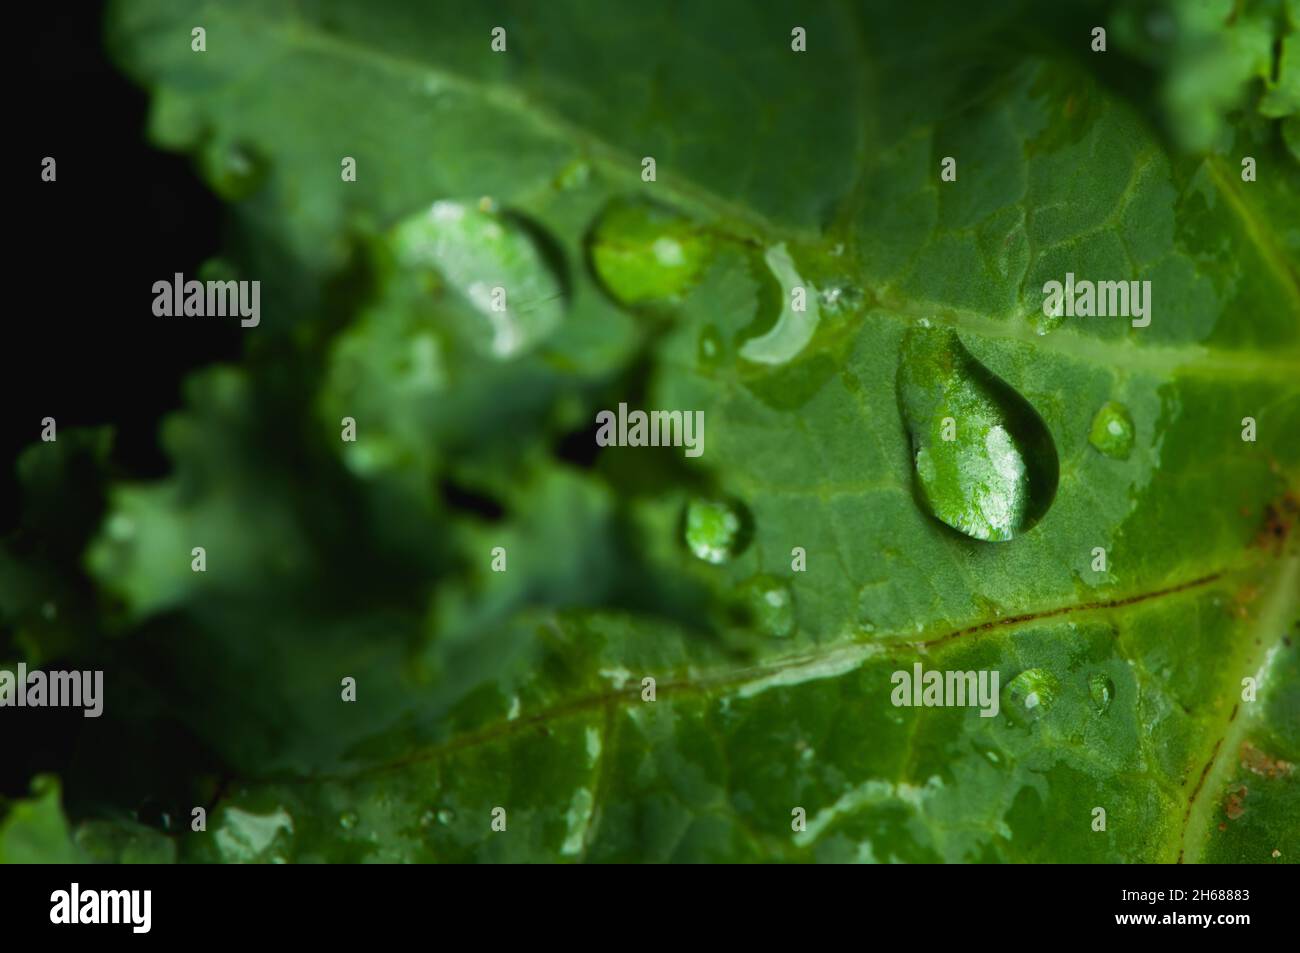 Close-up a drops of water on a green kale leaf. Stock Photo